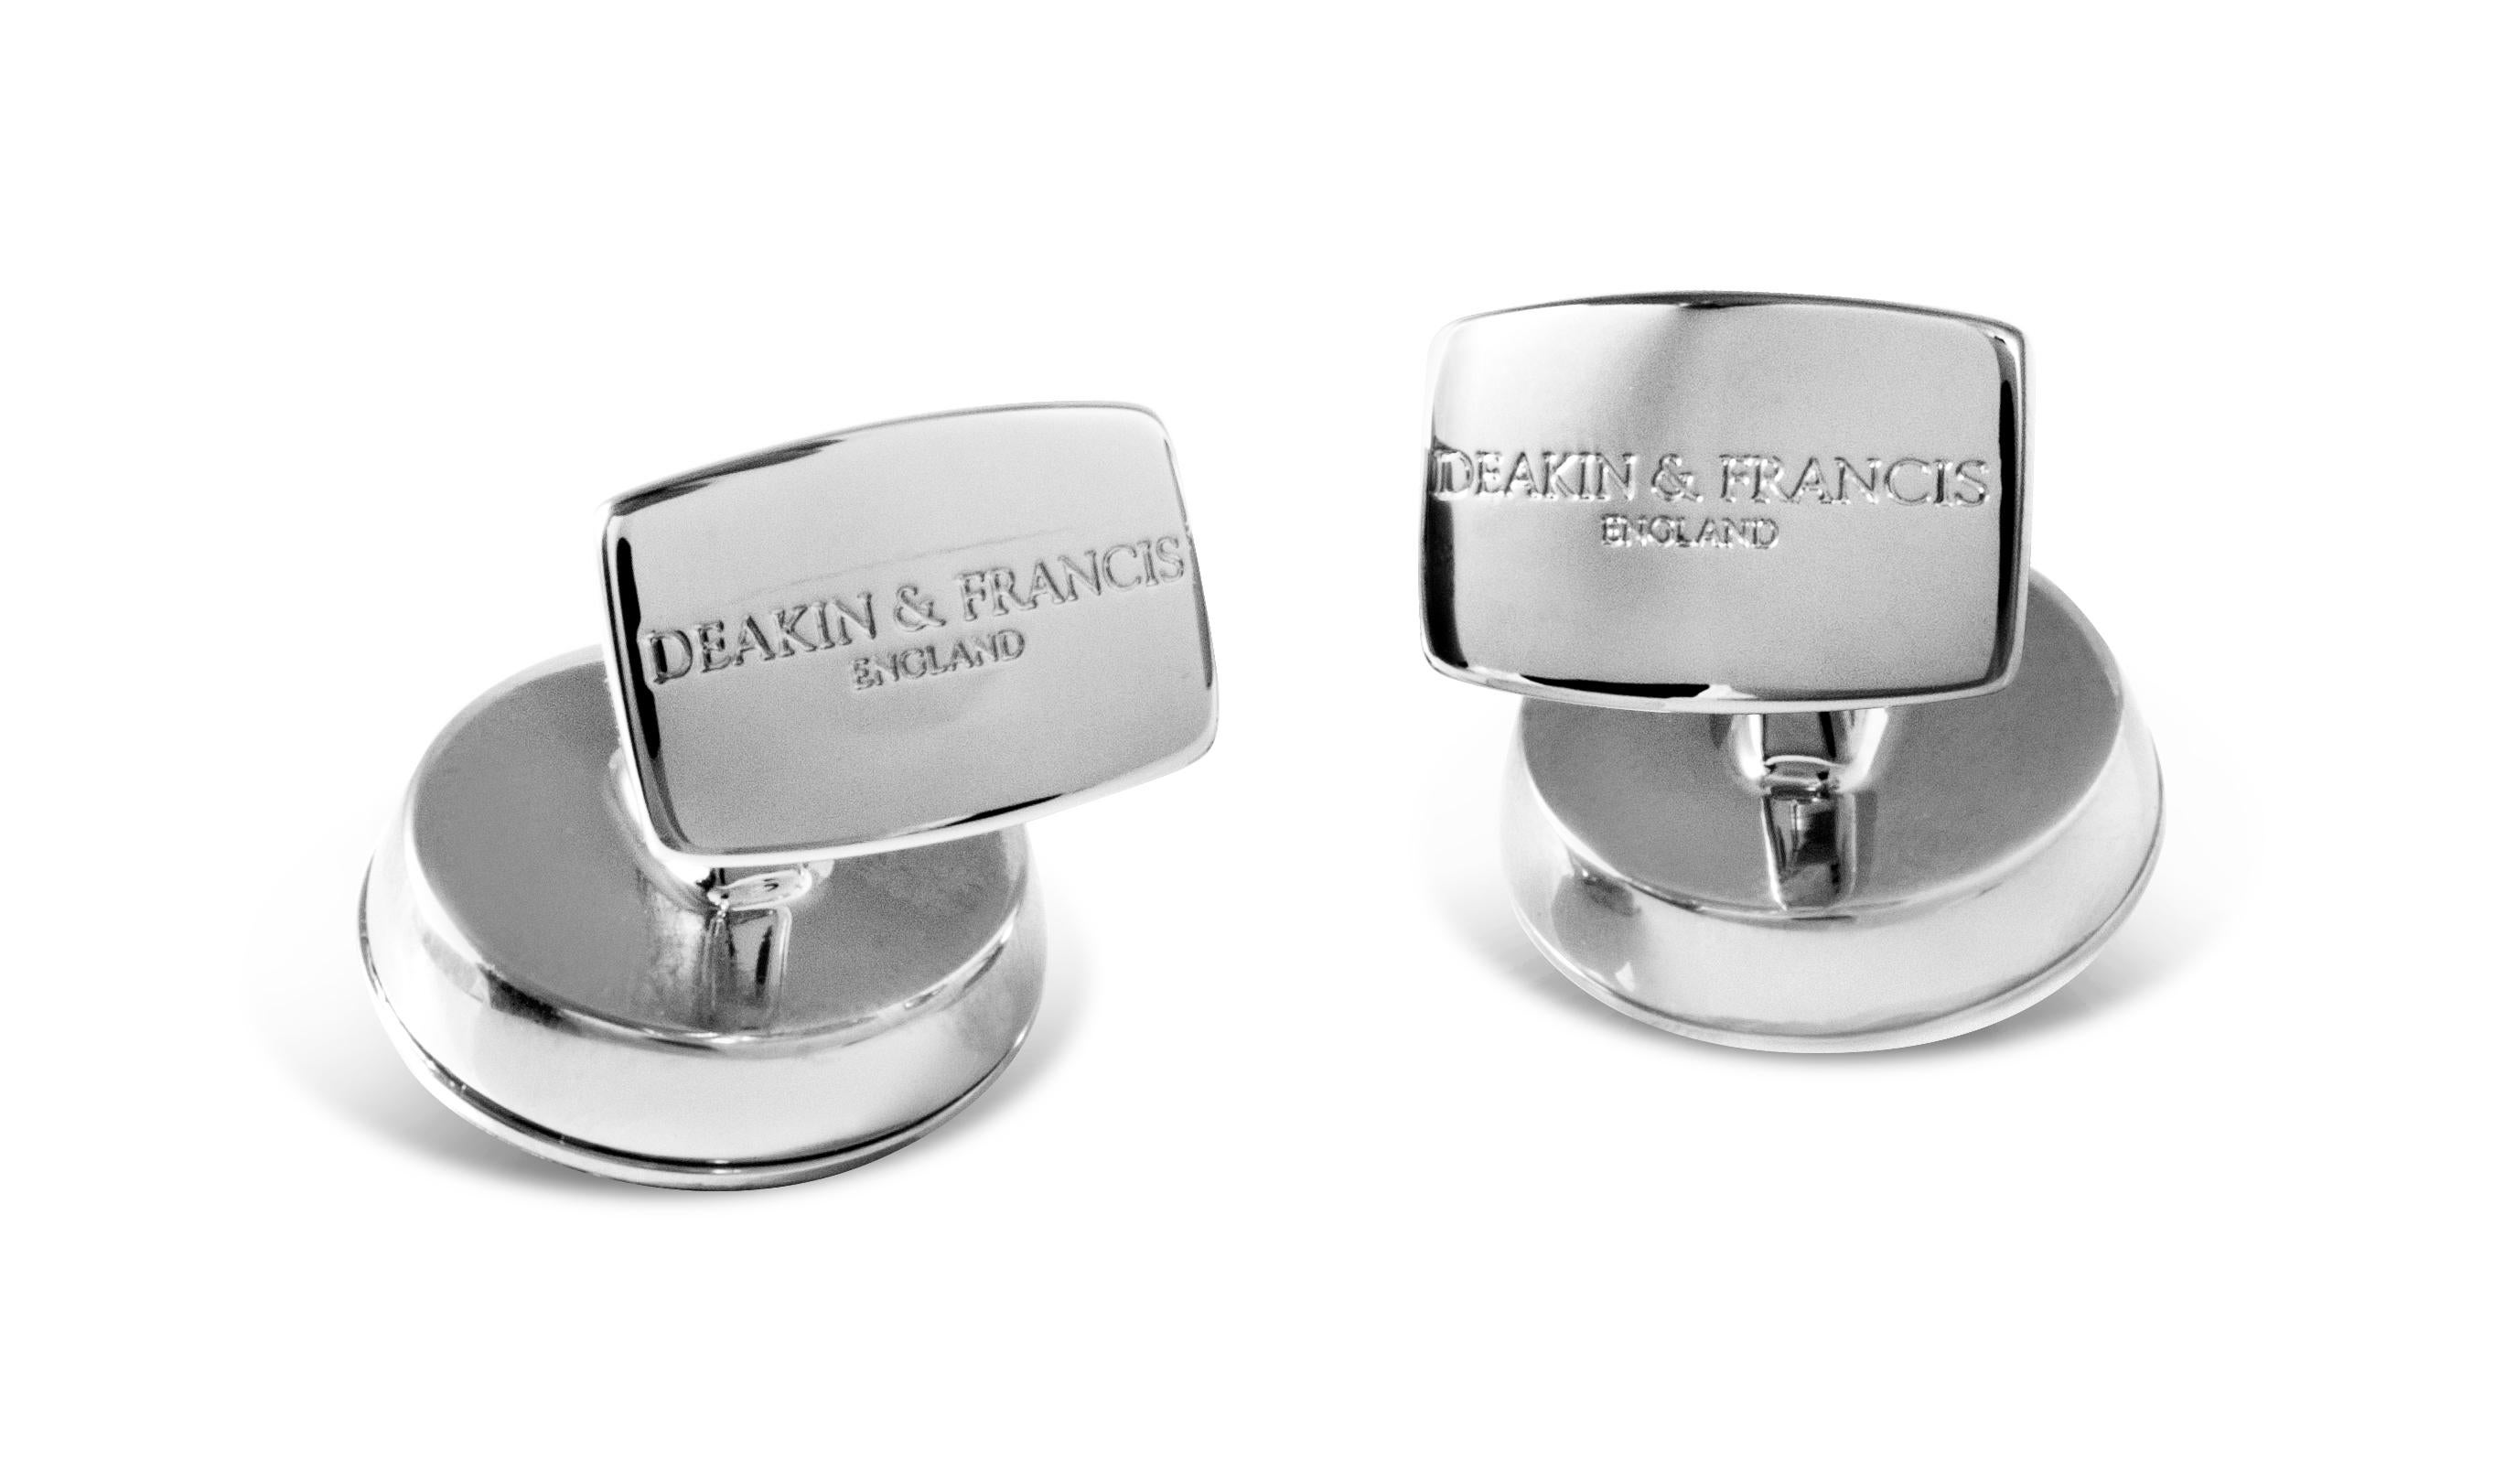 DEAKIN & FRANCIS, Piccadilly Arcade, London

Be hypnotic with your style with these freely rotating cufflinks in black. These round barrel shape cufflinks enclose seamless clean lines, with a sharp etched parallel line pattern and a concealed second